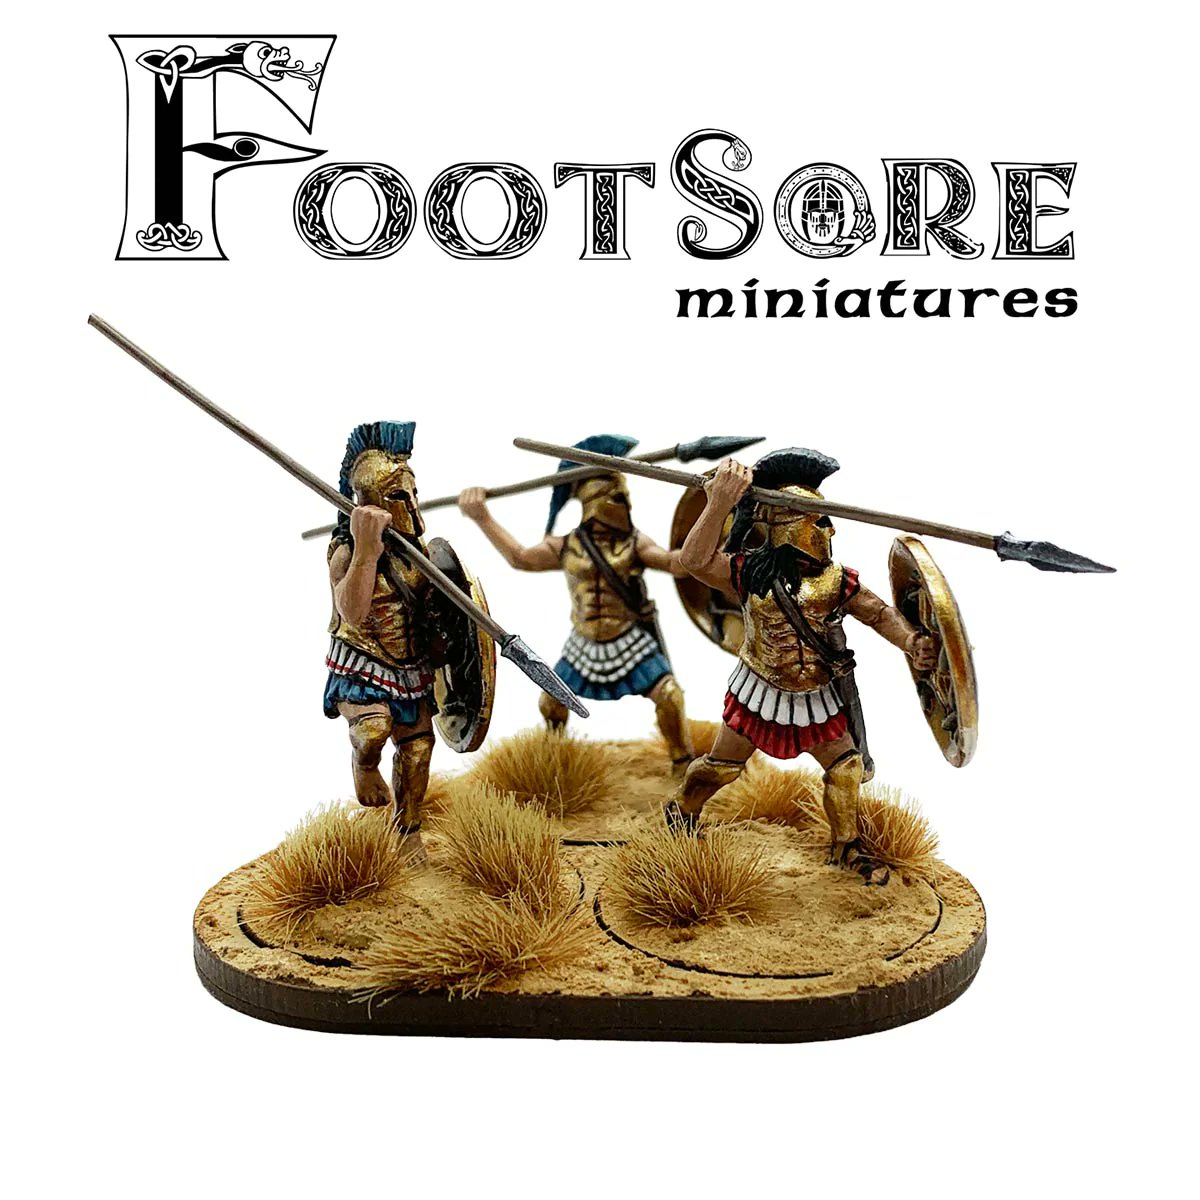 •Hoplites in Bronze thorax•
Useful protection but heavy to wear
rebrand.ly/d89kx8d
#MythicGods #MortalGods #AncientGreece #Greece #Ancients #footsore #footsoreminiatures #SPG #wargaming #warmongers #gaming #minwargaming #tabletopgames #miniatures #figures